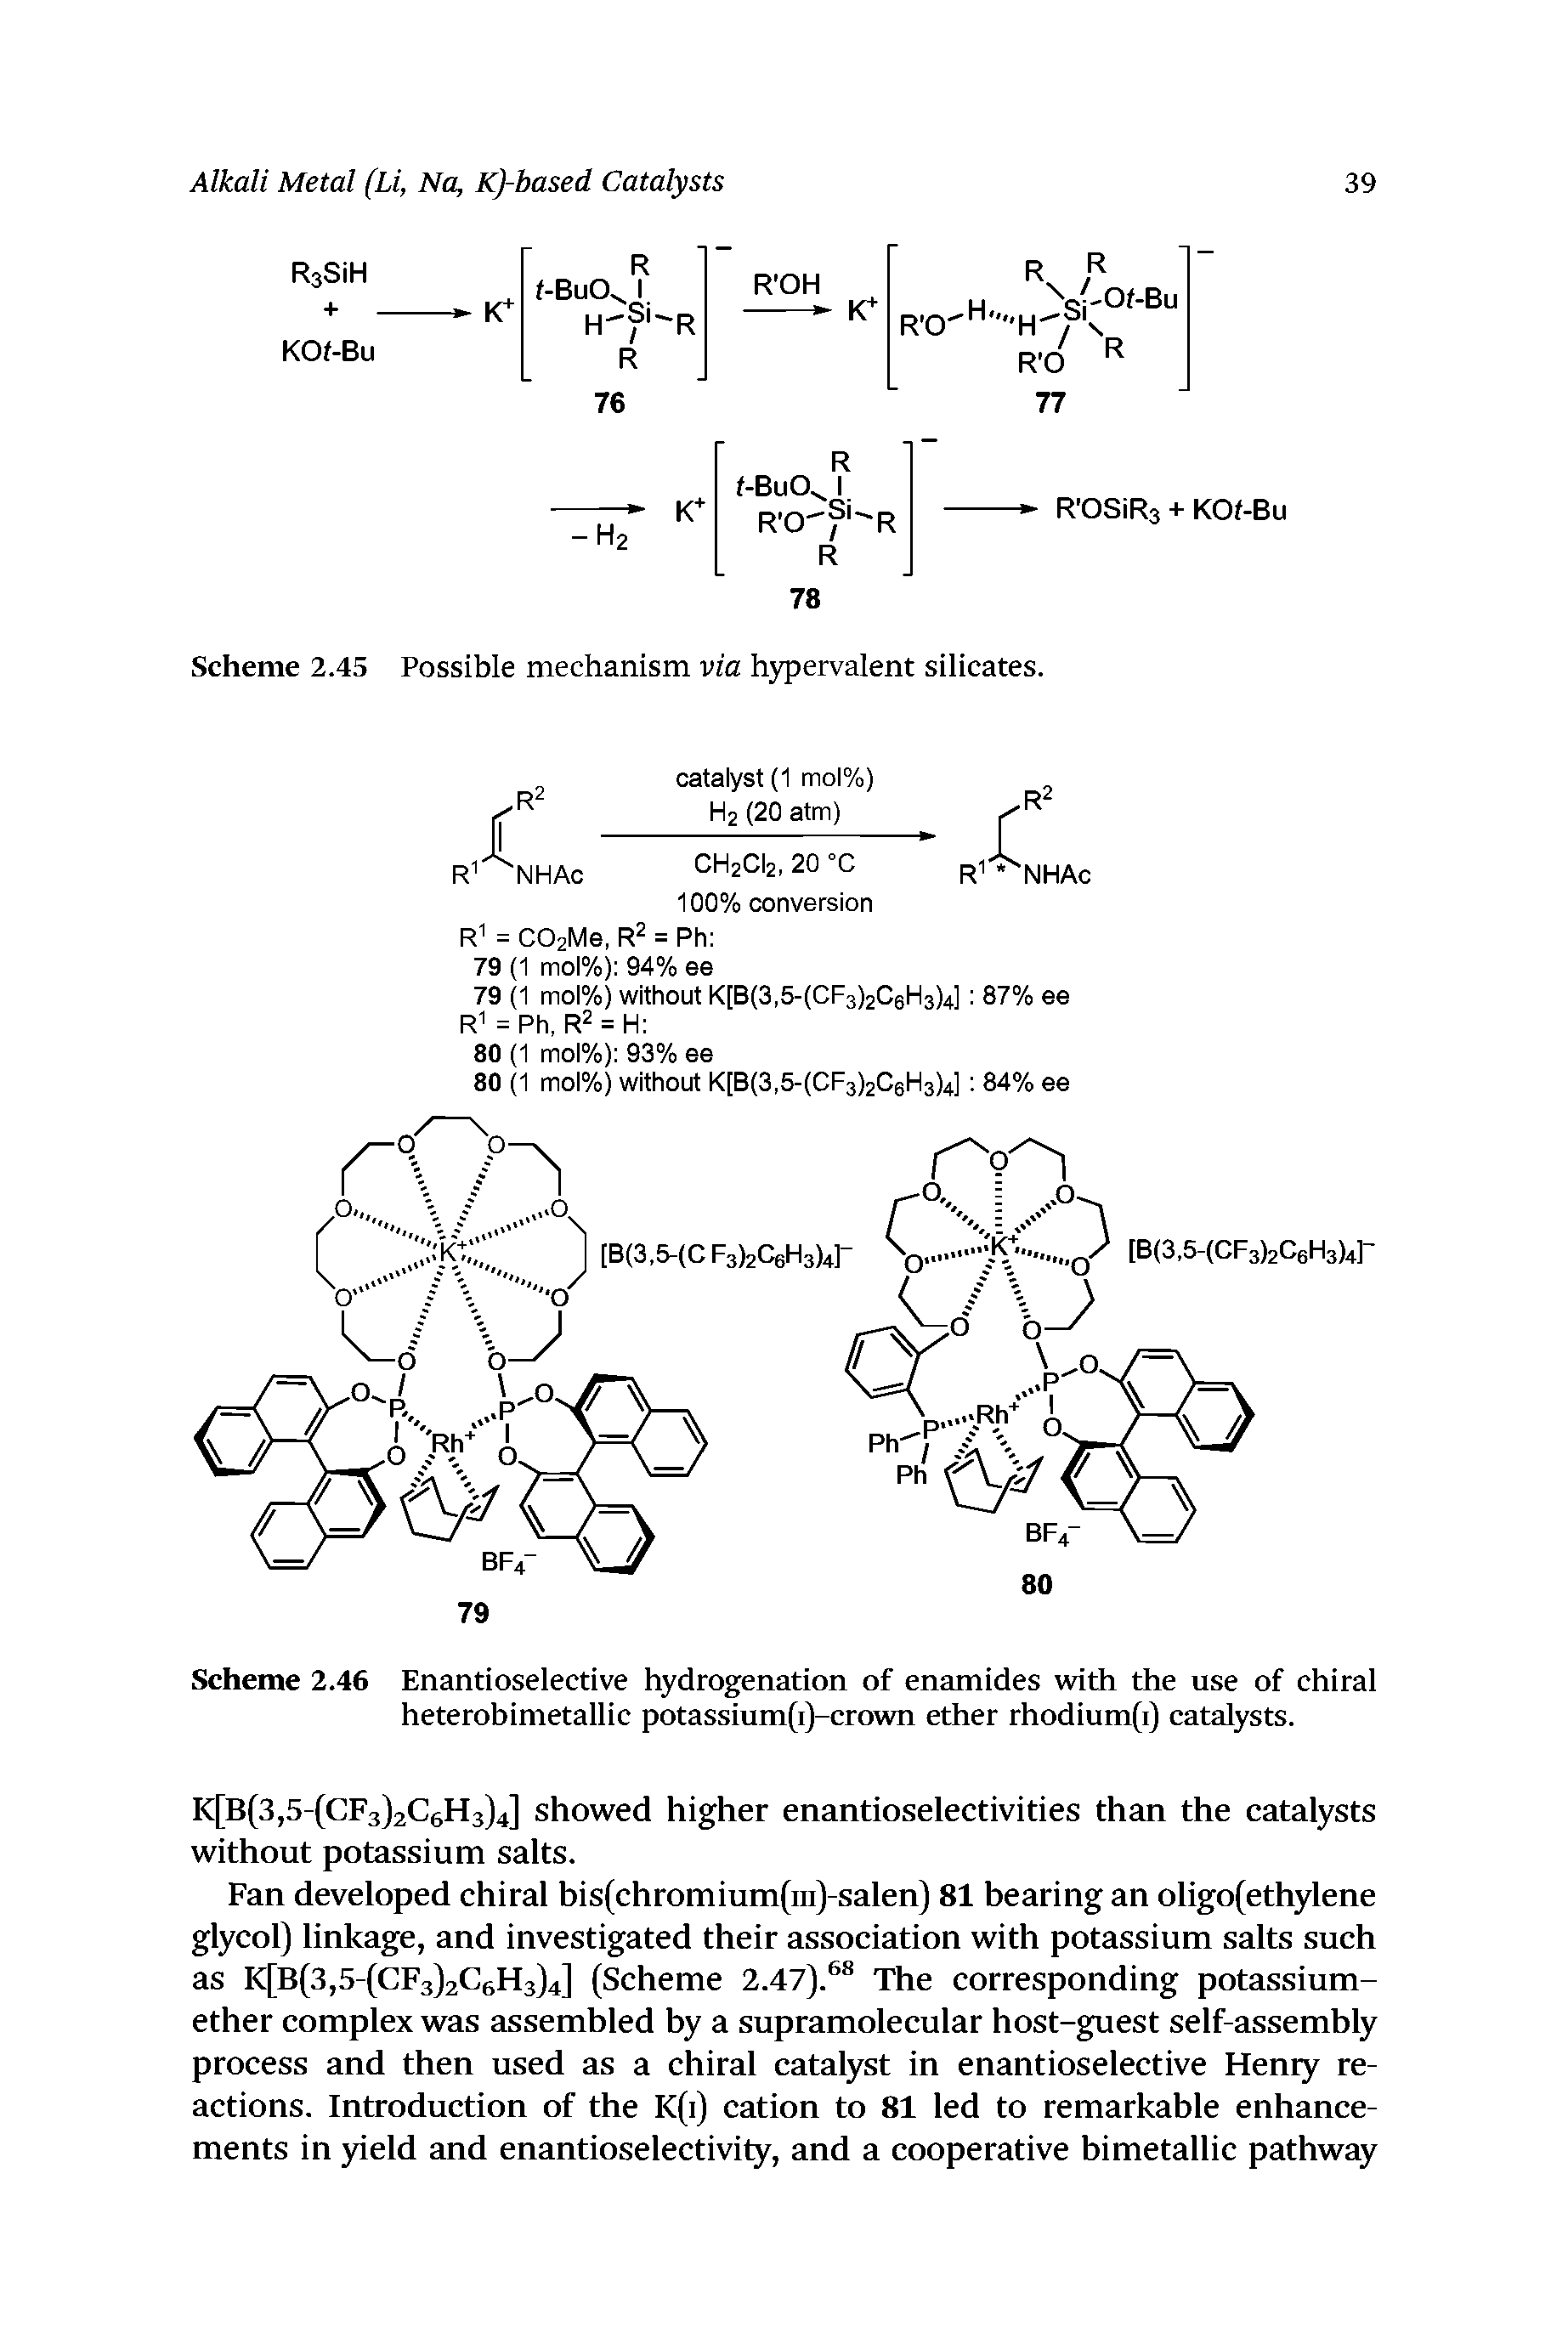 Scheme 2.46 Enantioselective hydrogenation of enamides with the use of chiral heterobimetallic potassium(i)-crown ether rhodium(i) catalysts.